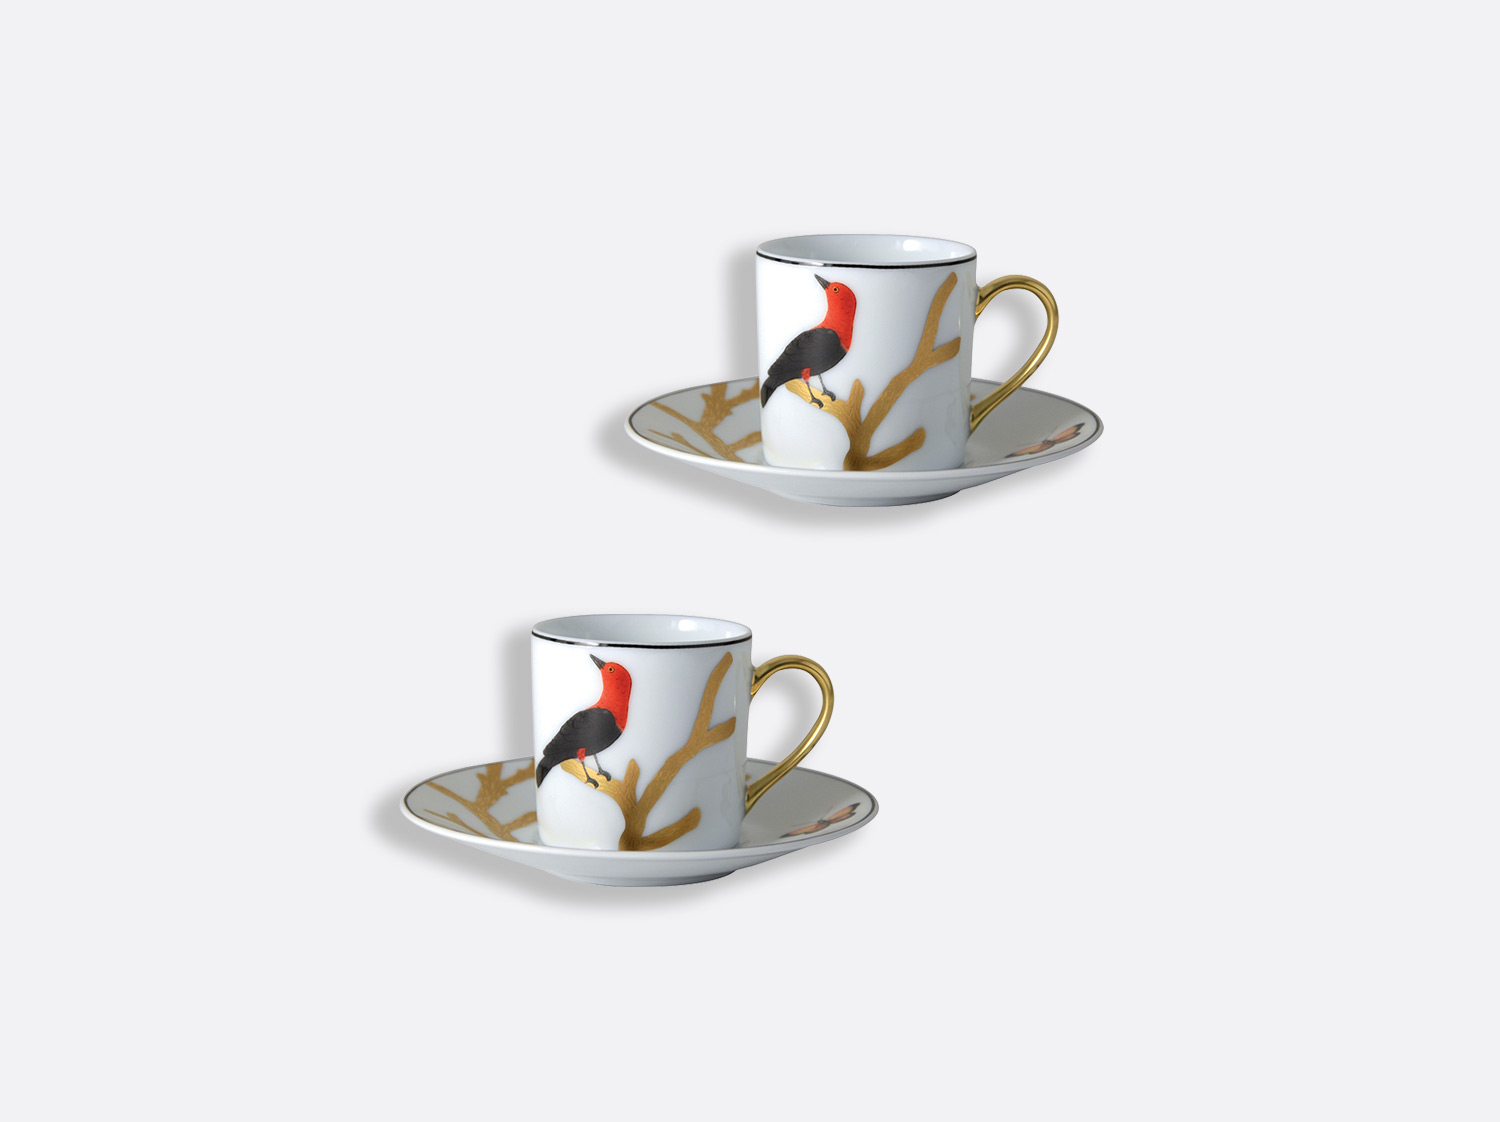 China Set of 2 of the collection Aux oiseaux | Bernardaud